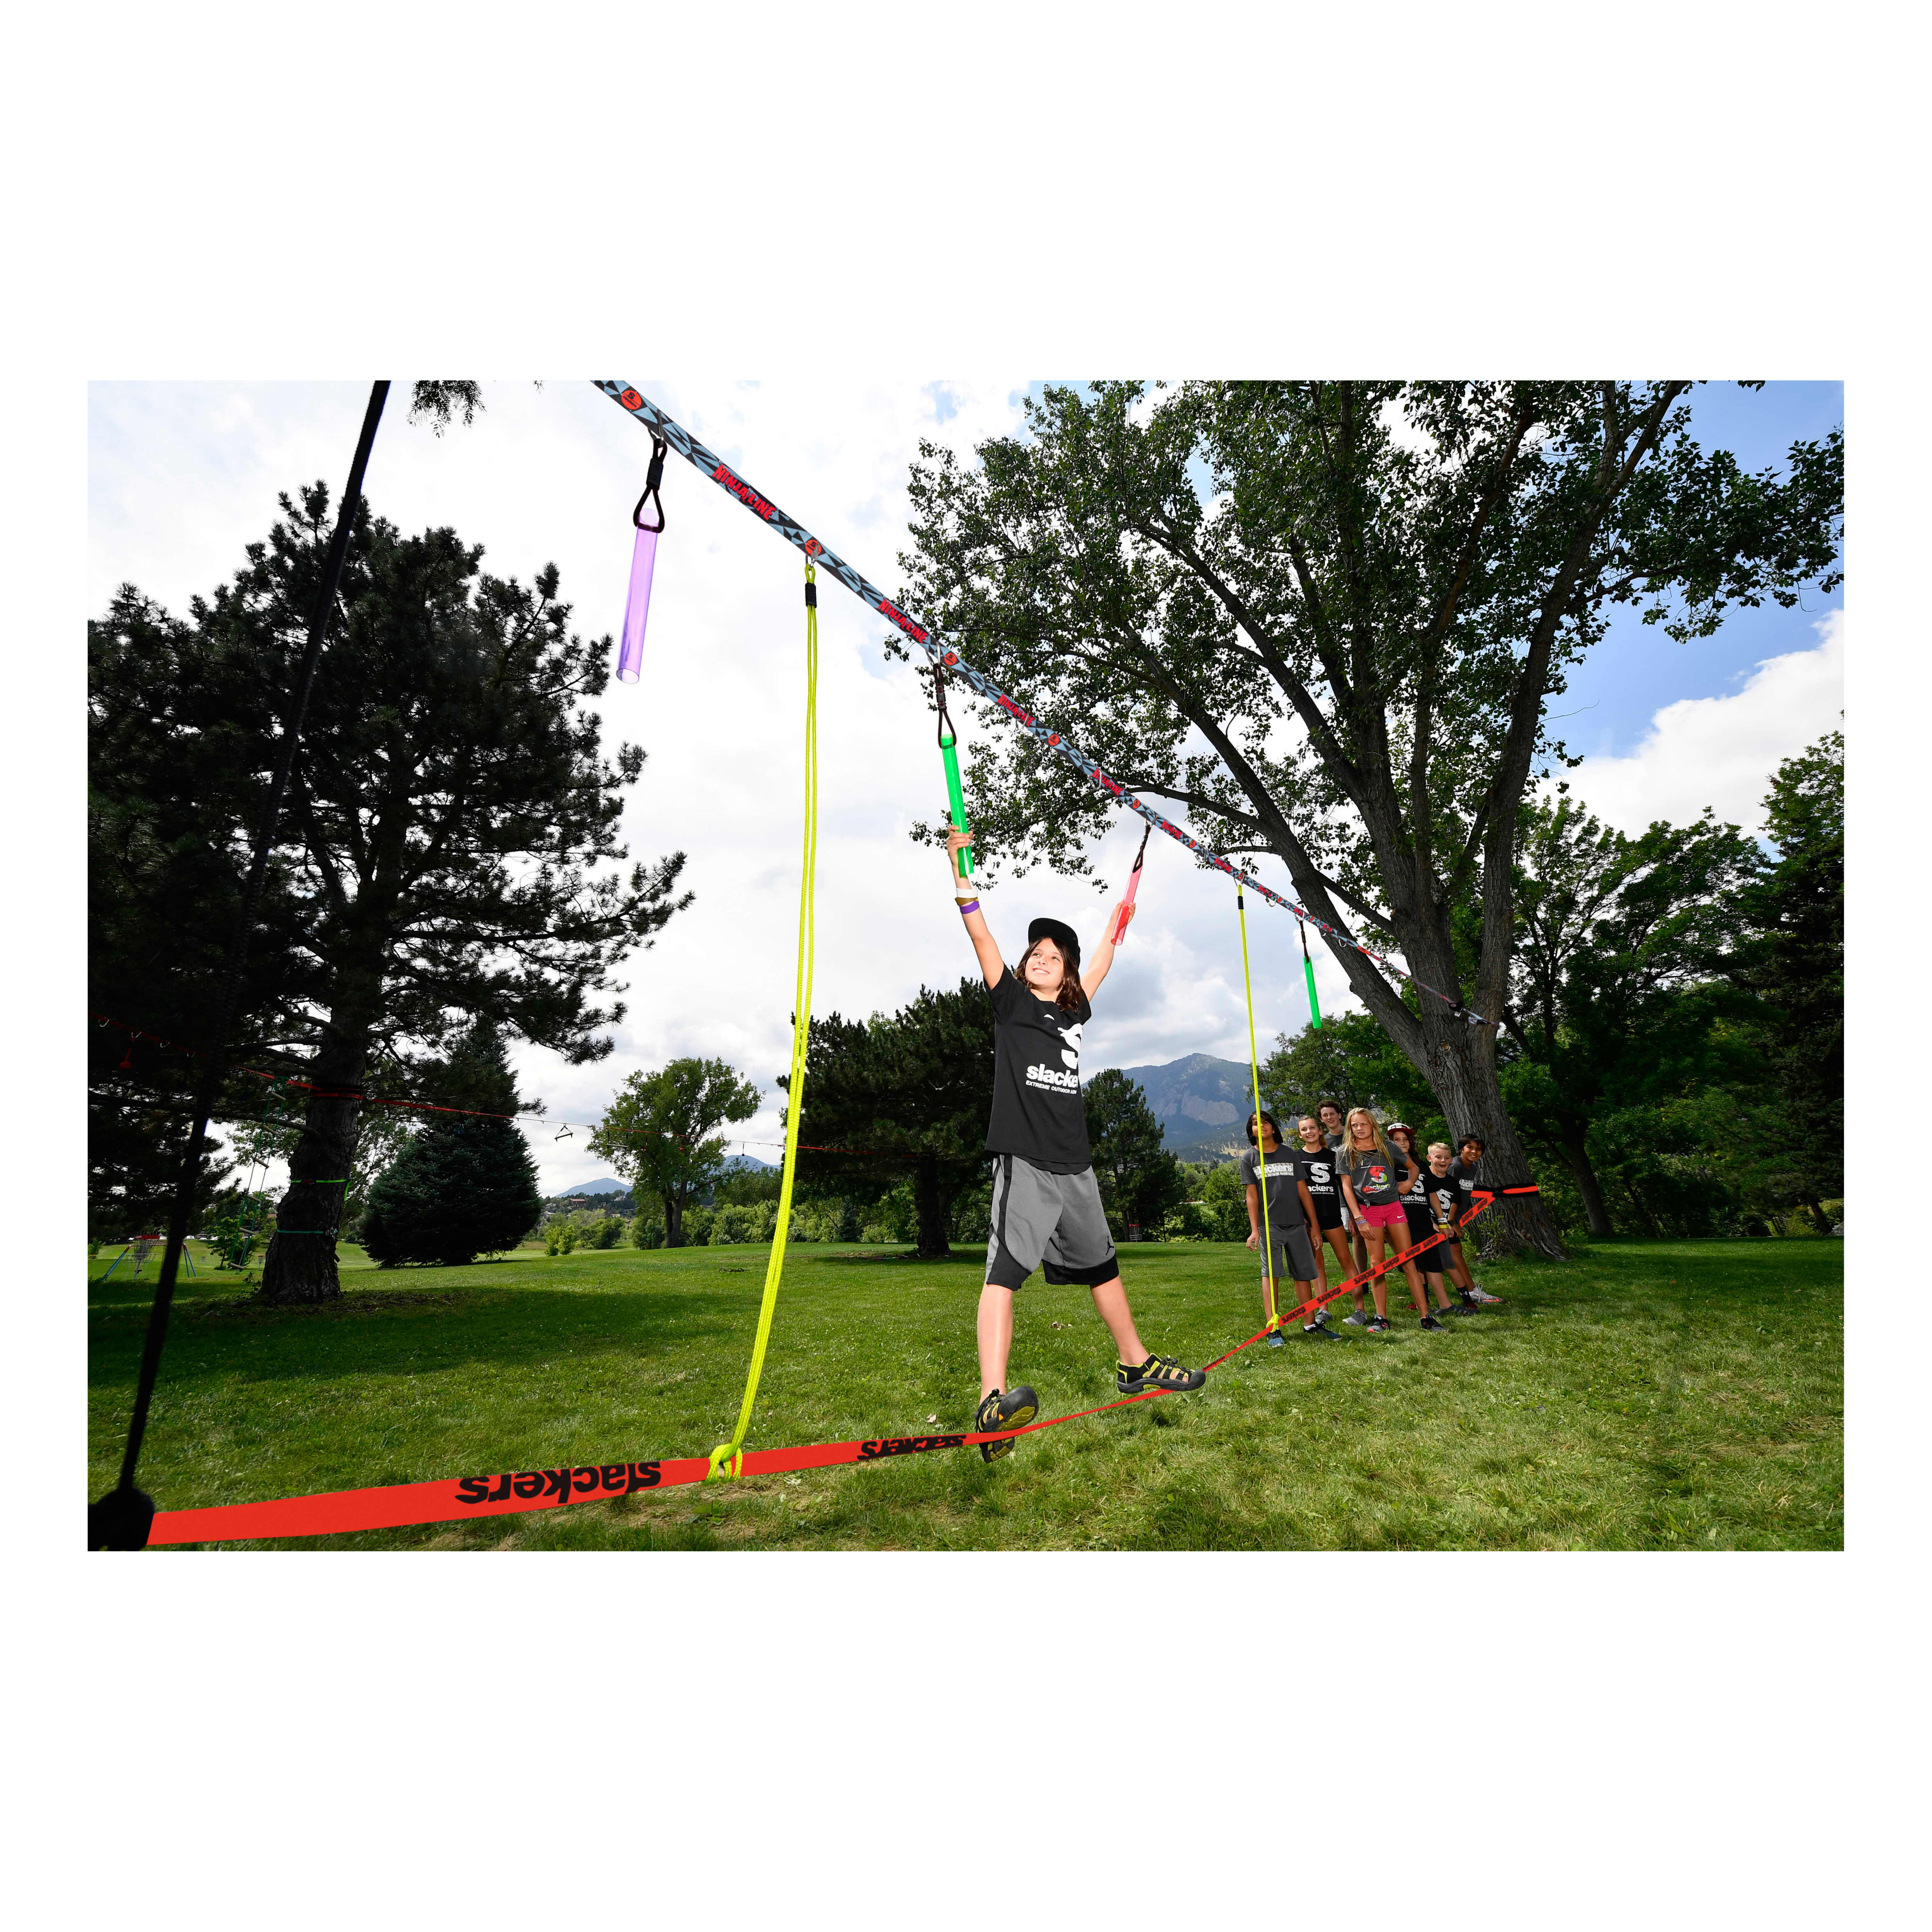 Slackers Ninjaline Ropes Course Set - In the Field